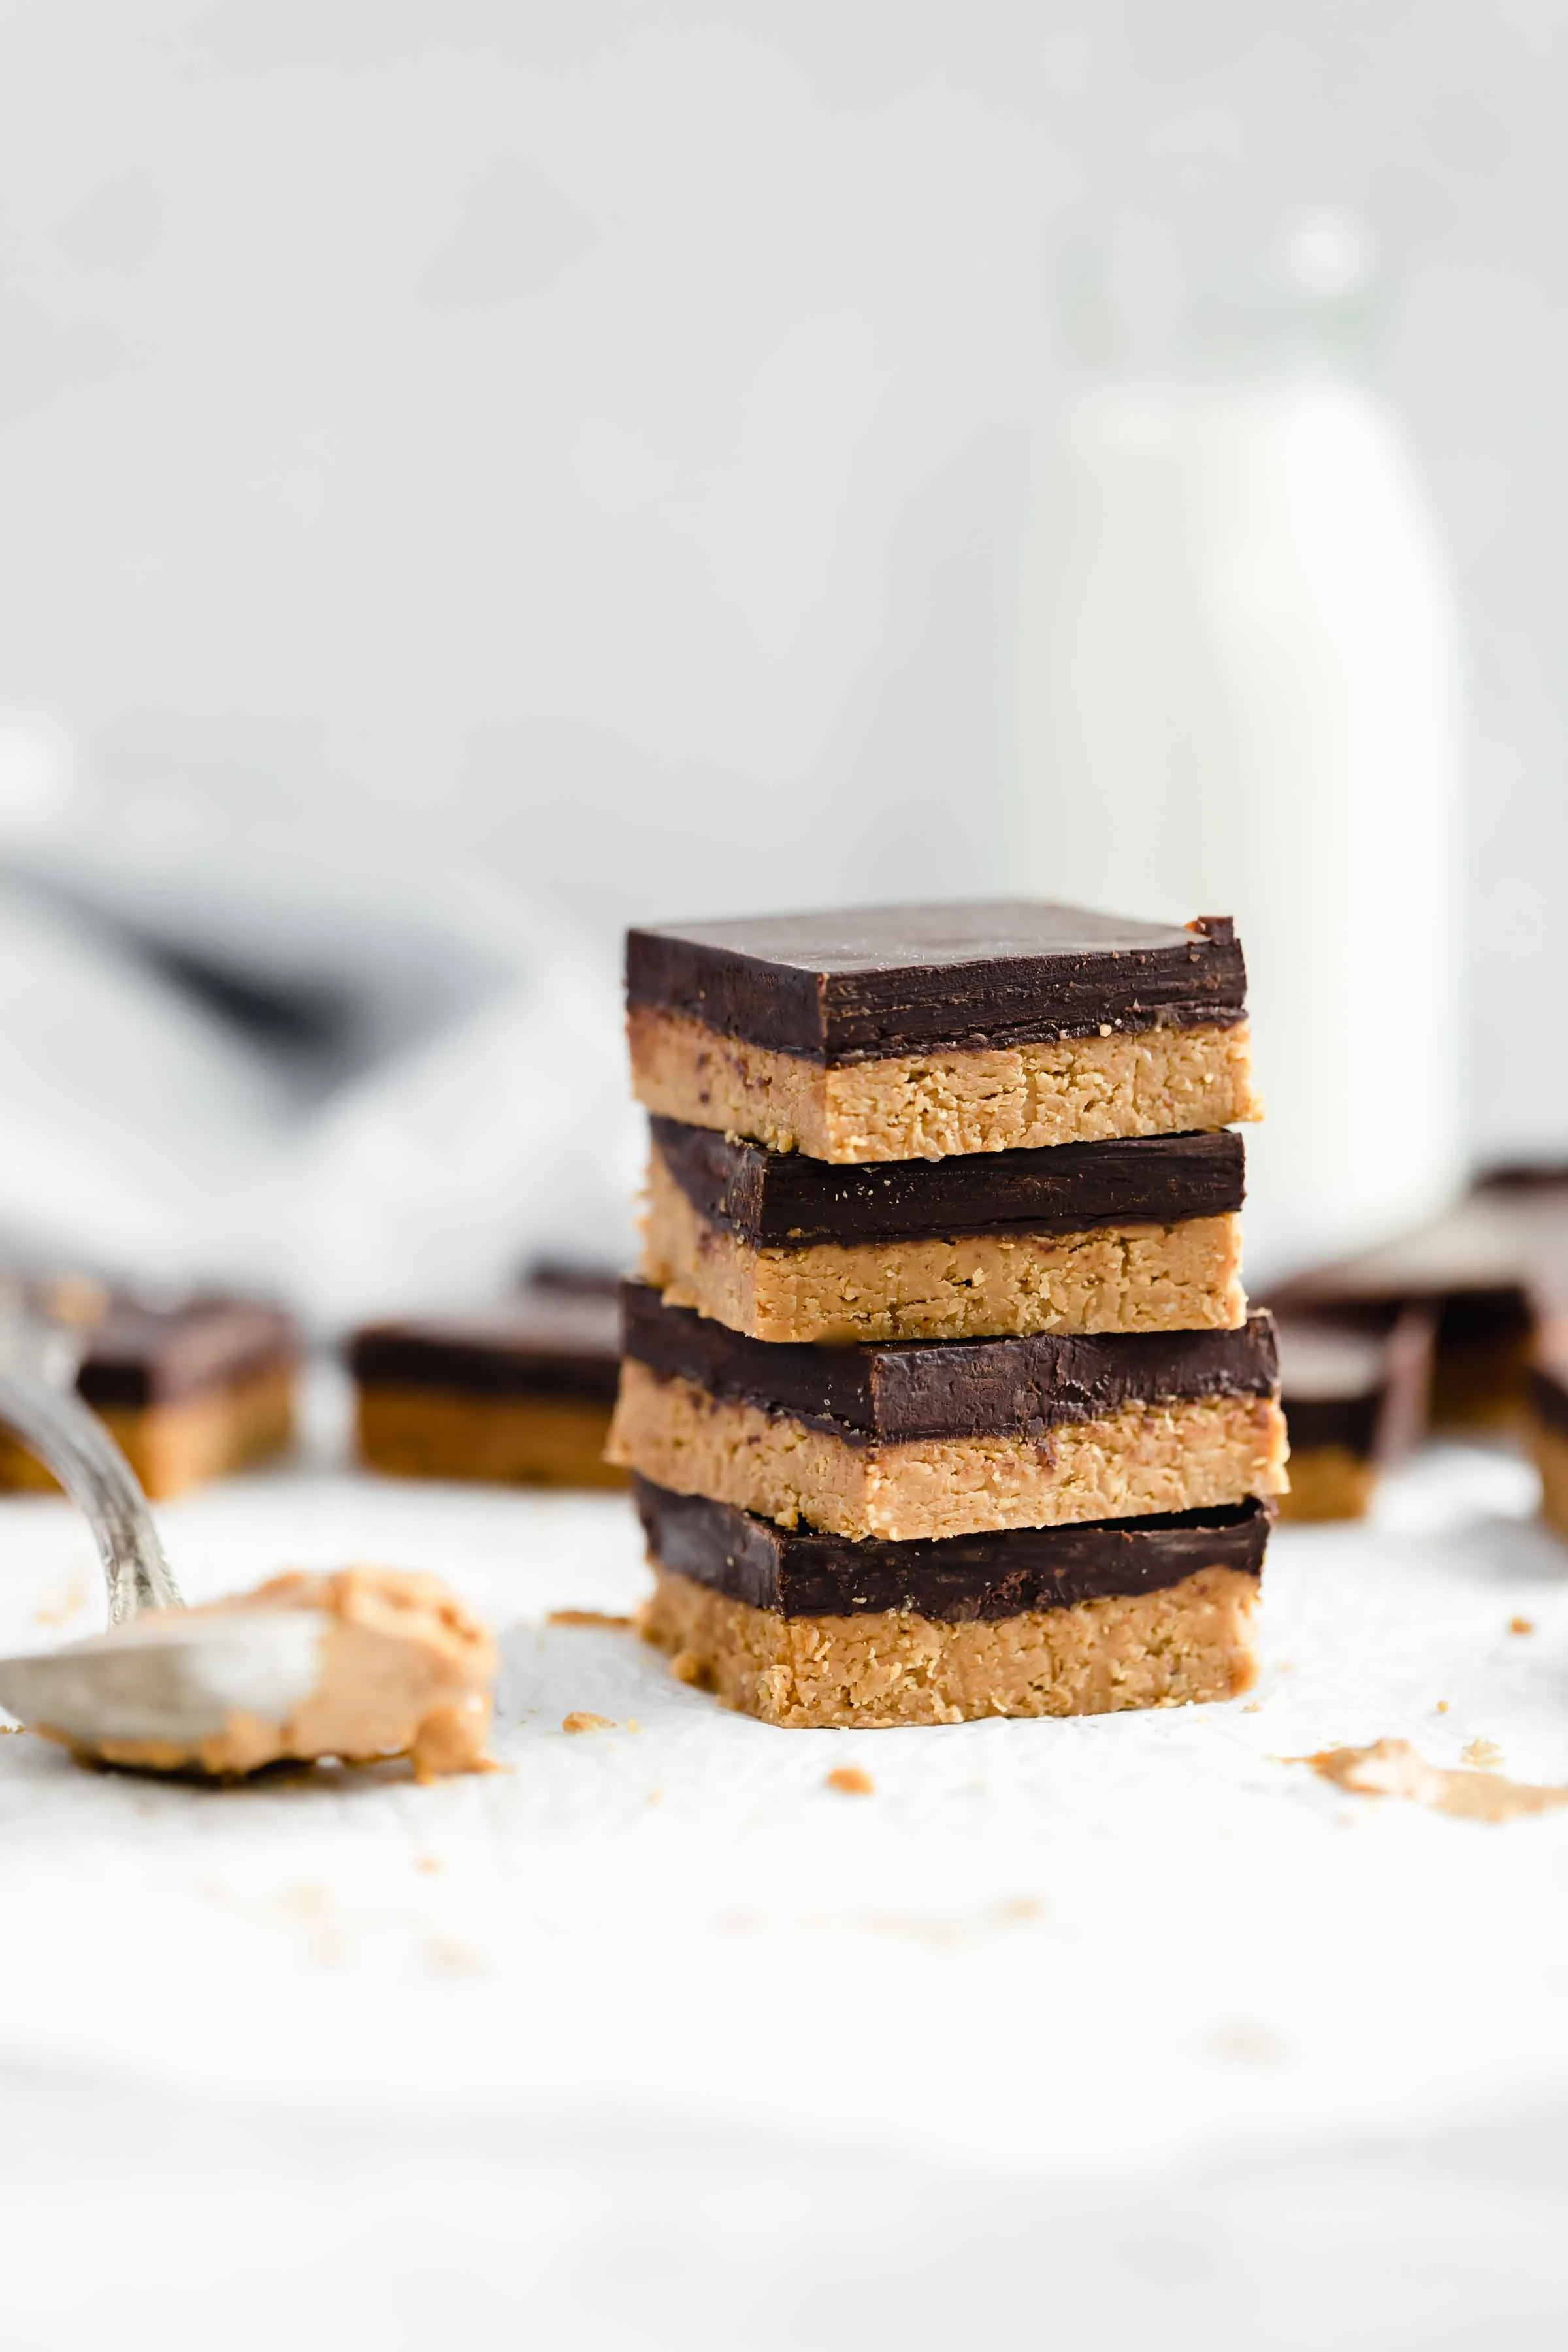 No bake healthy vegan peanut butter chocolate bars made with just 4 ingredients!